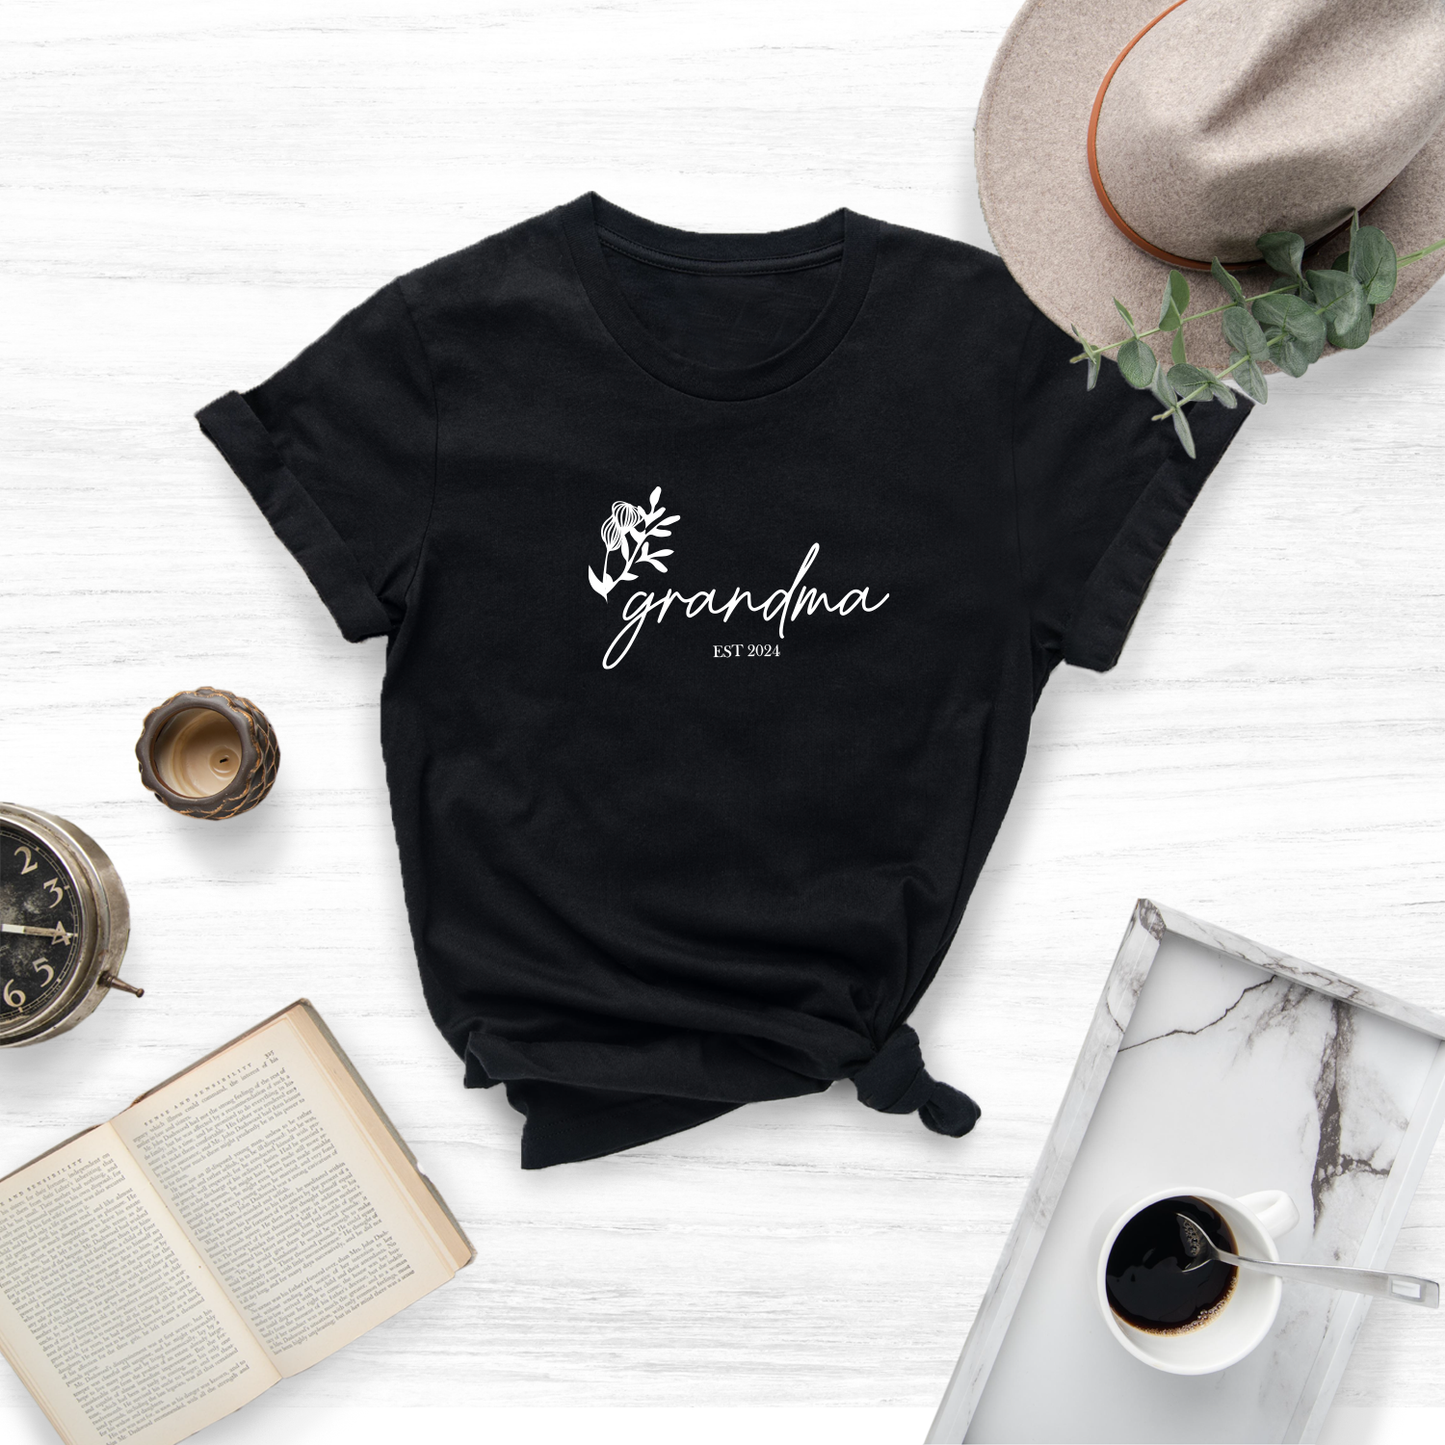 "Personalized 'Grandma' T-shirt with a loving Mother's Day message.